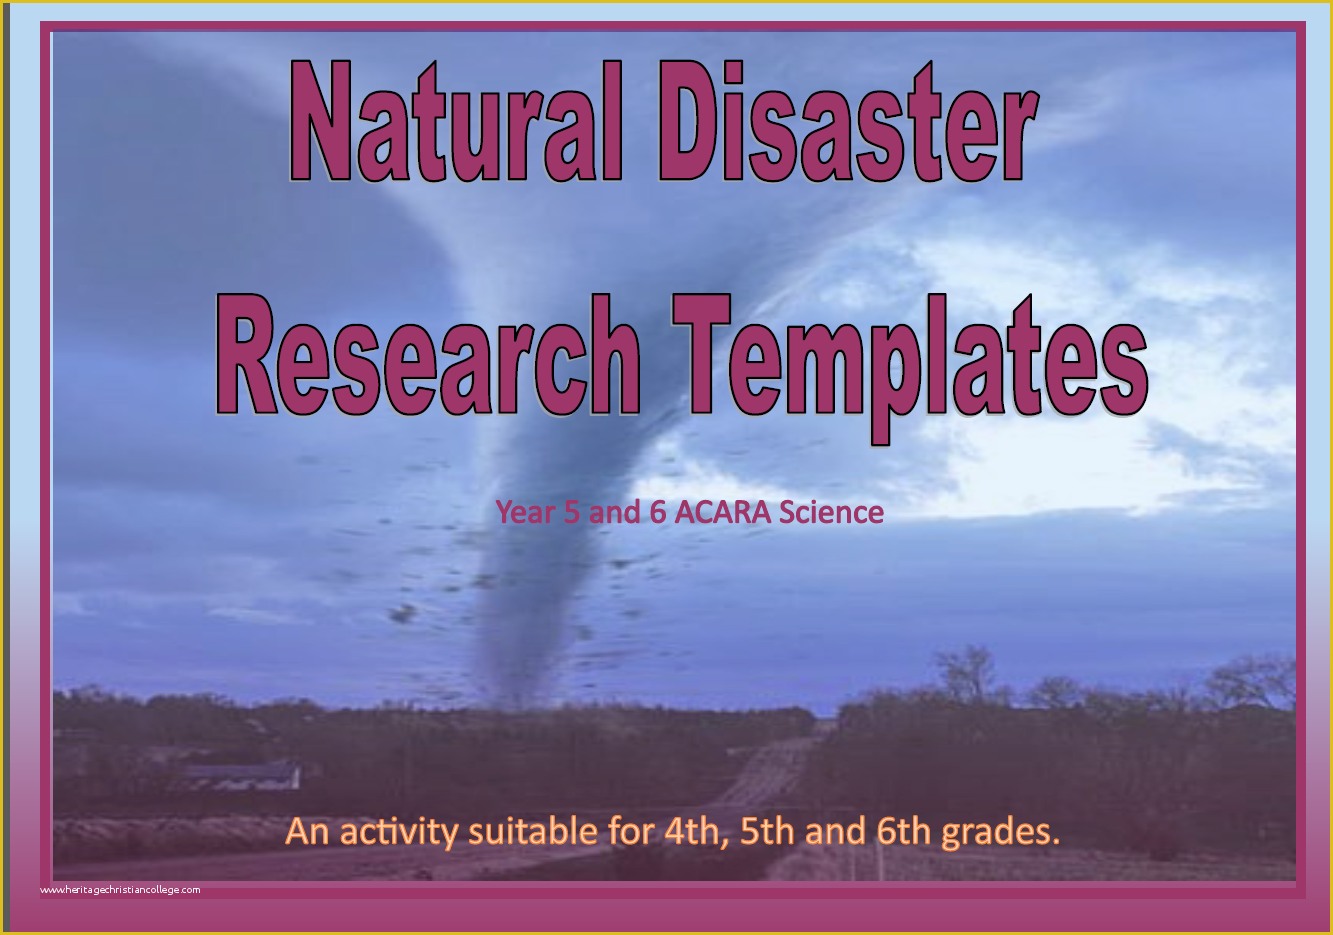 Natural Disaster Powerpoint Templates Free Of Natural Disaster Research Templates